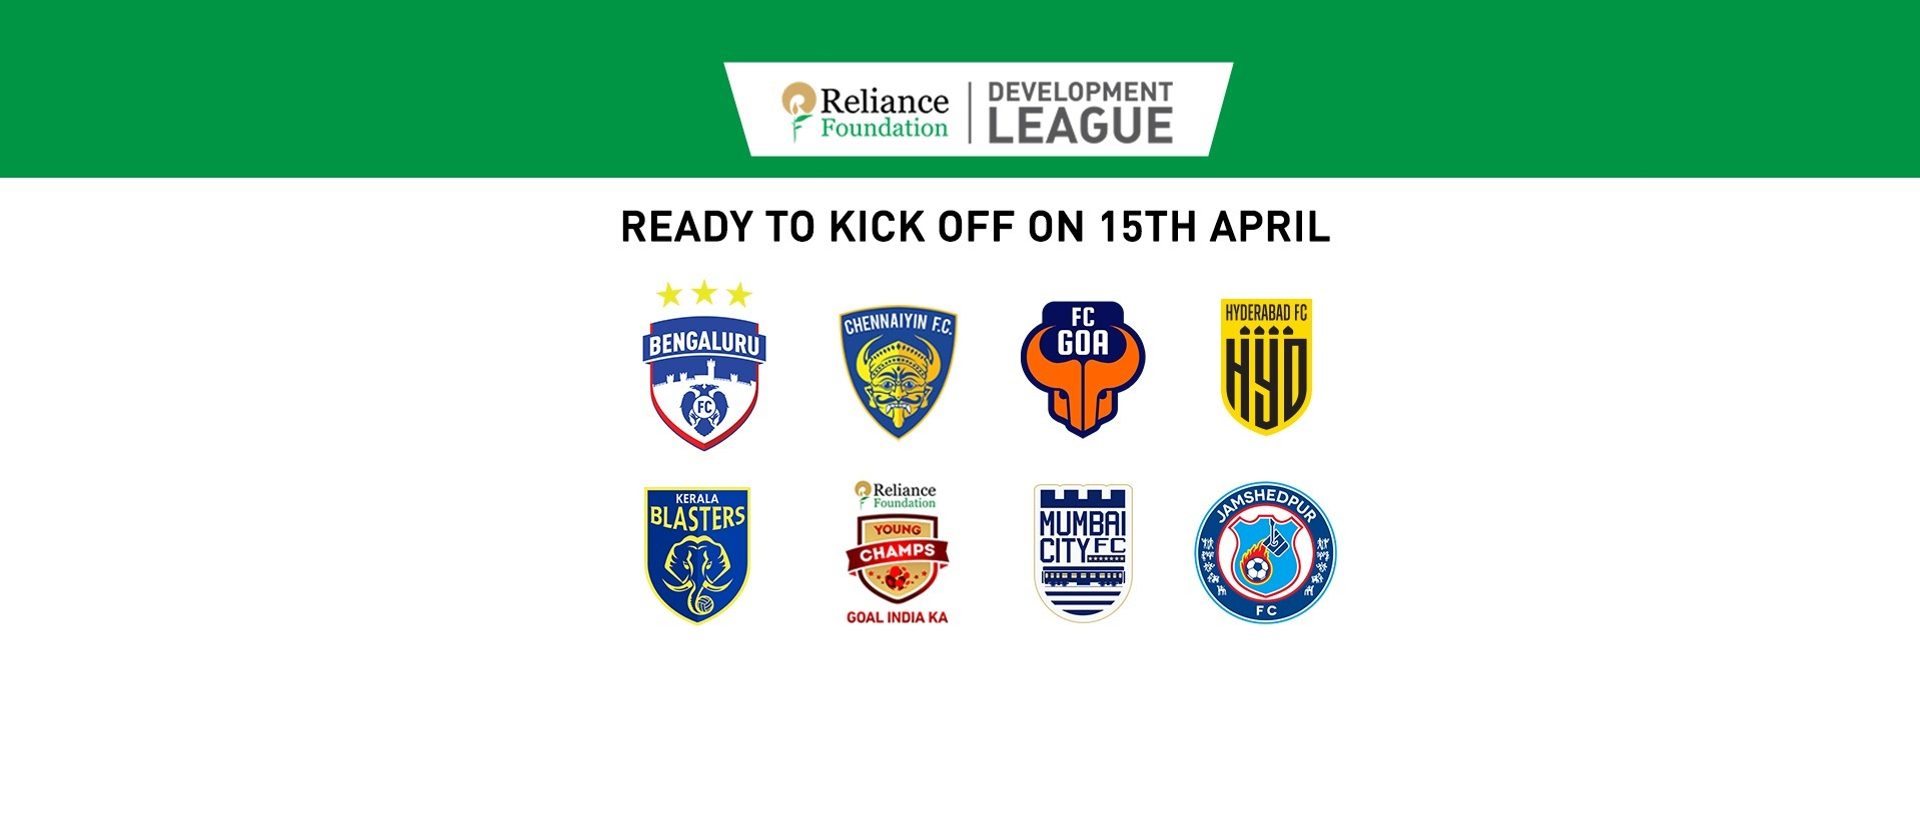 Sky's the limit as India’s finest talents get Reliance Foundation Development League ready in inaugural season